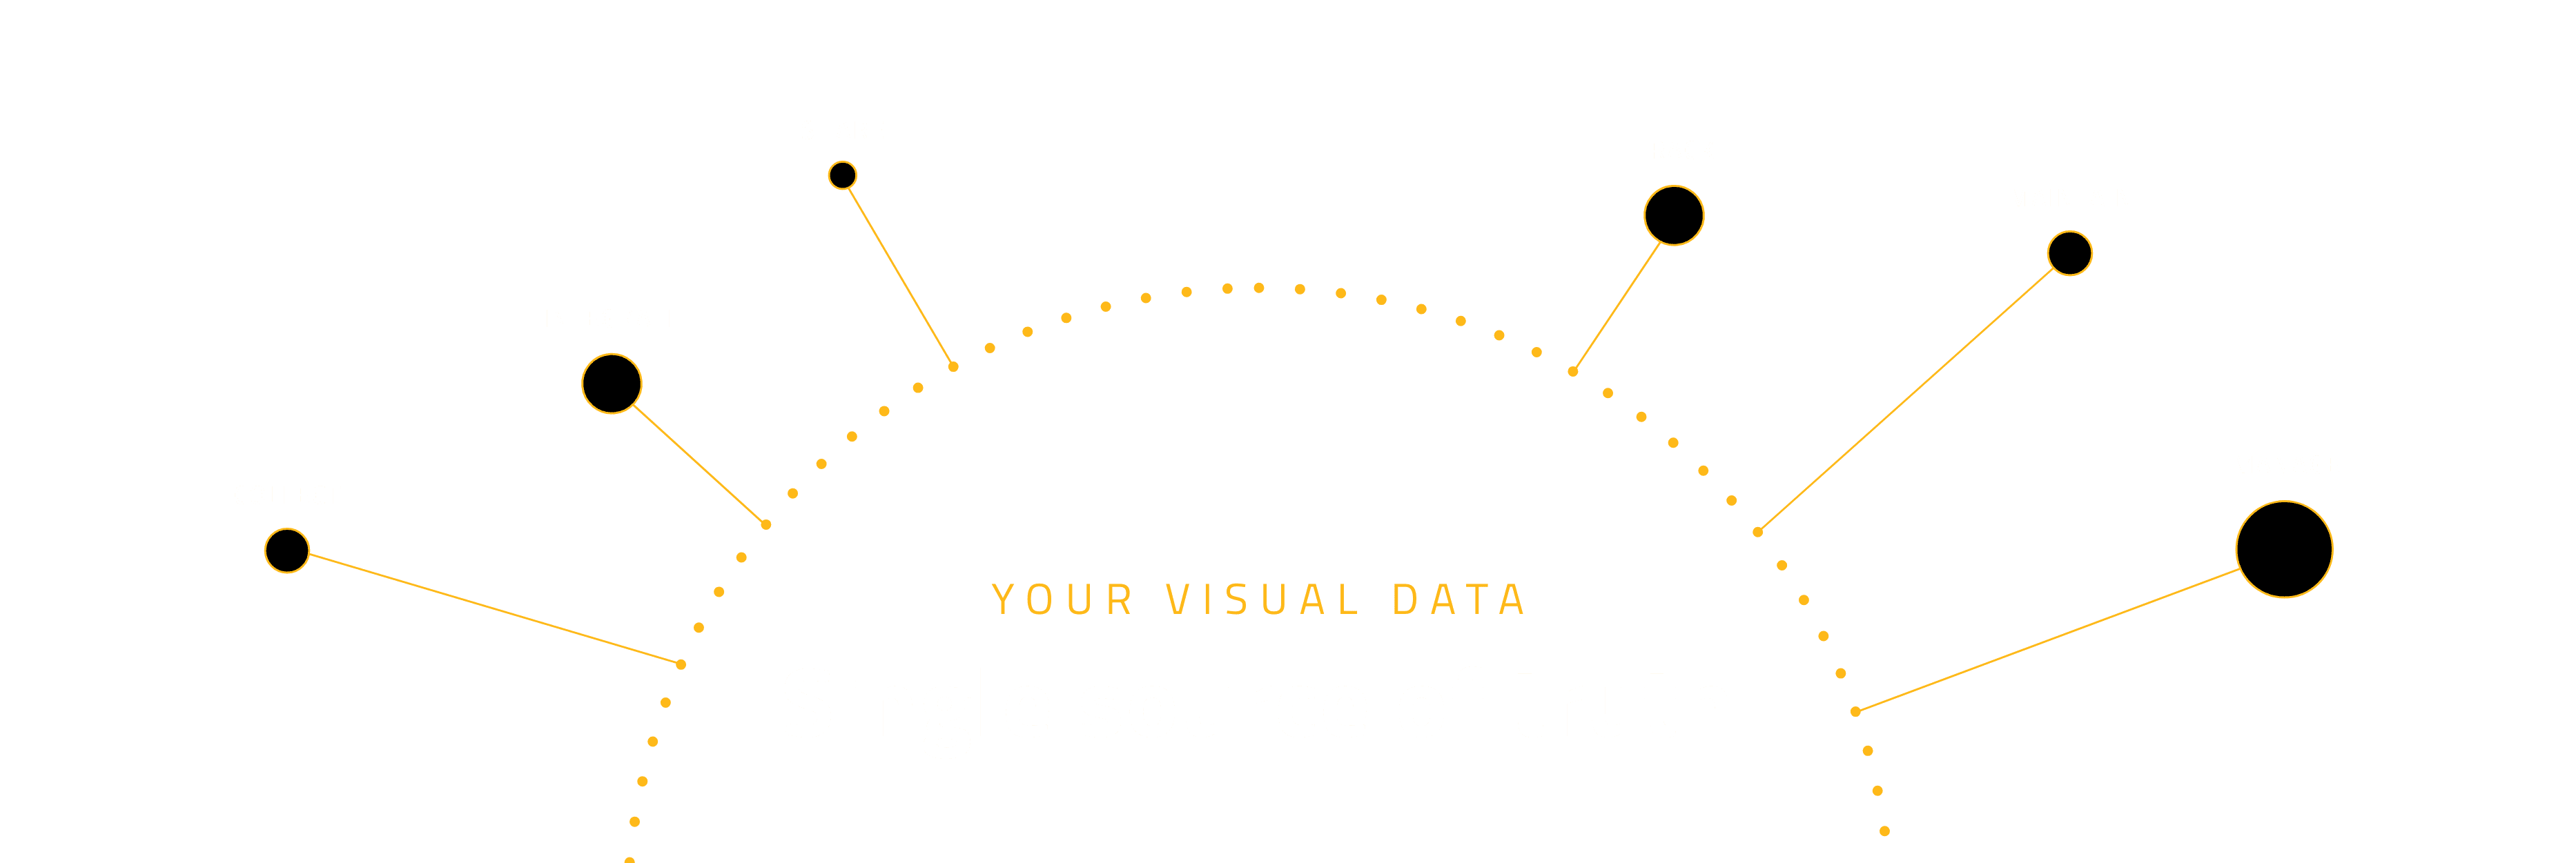 Single source of truth